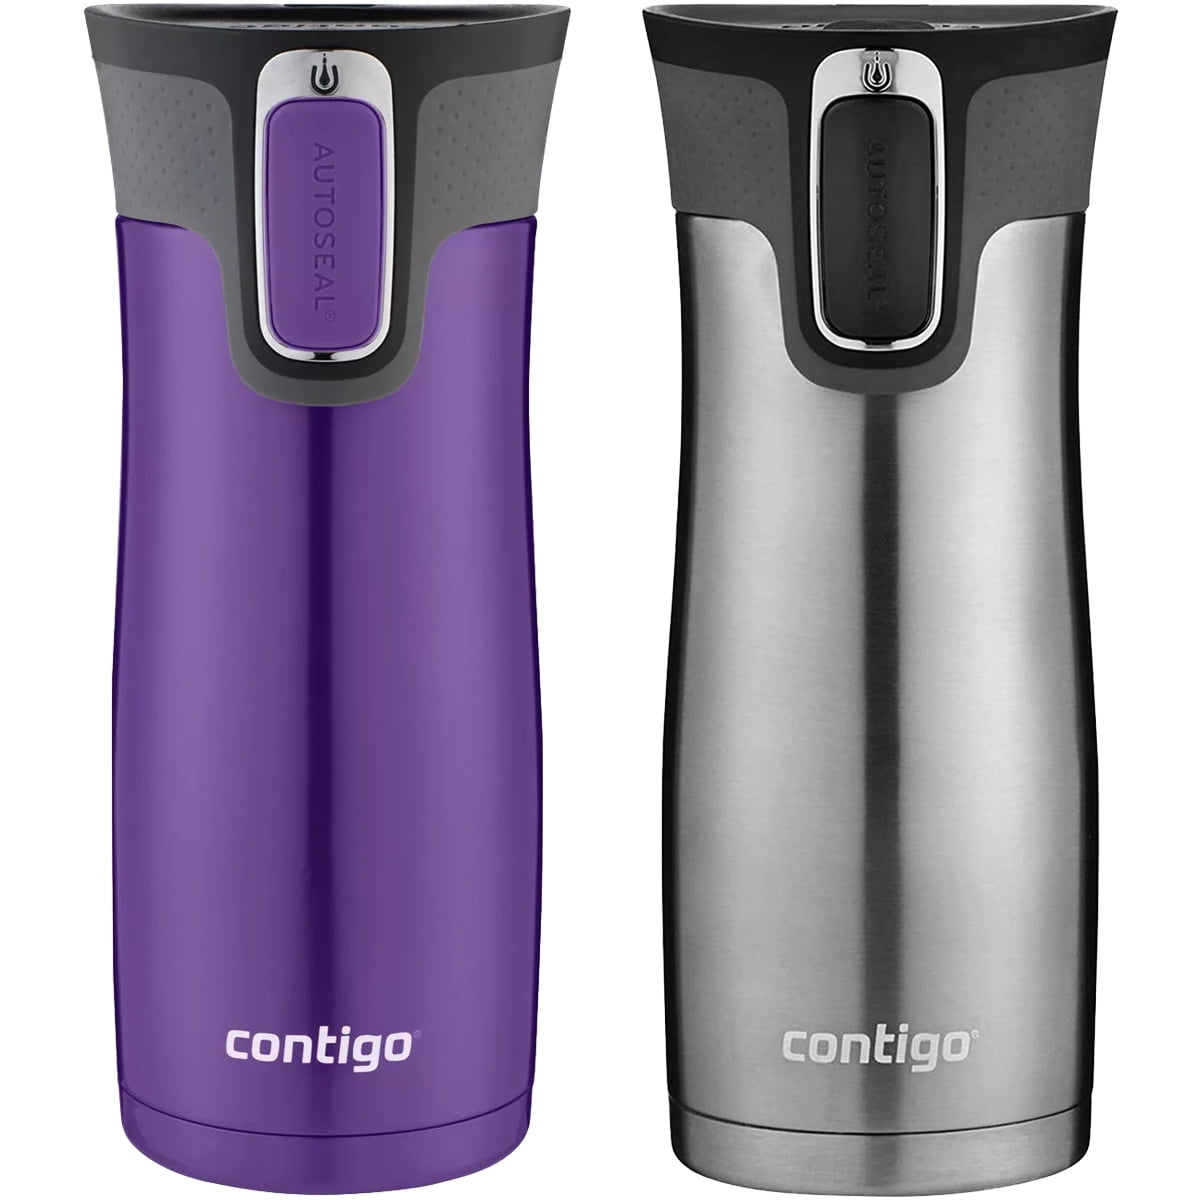 Contigo West Loop Stainless Steel Vacuum-Insulated Travel Mug with  Spill-Proof Lid, Keeps Drinks Hot up to 5 Hours and Cold up to 12 Hours,  16oz Earl Grey : Home & Kitchen 